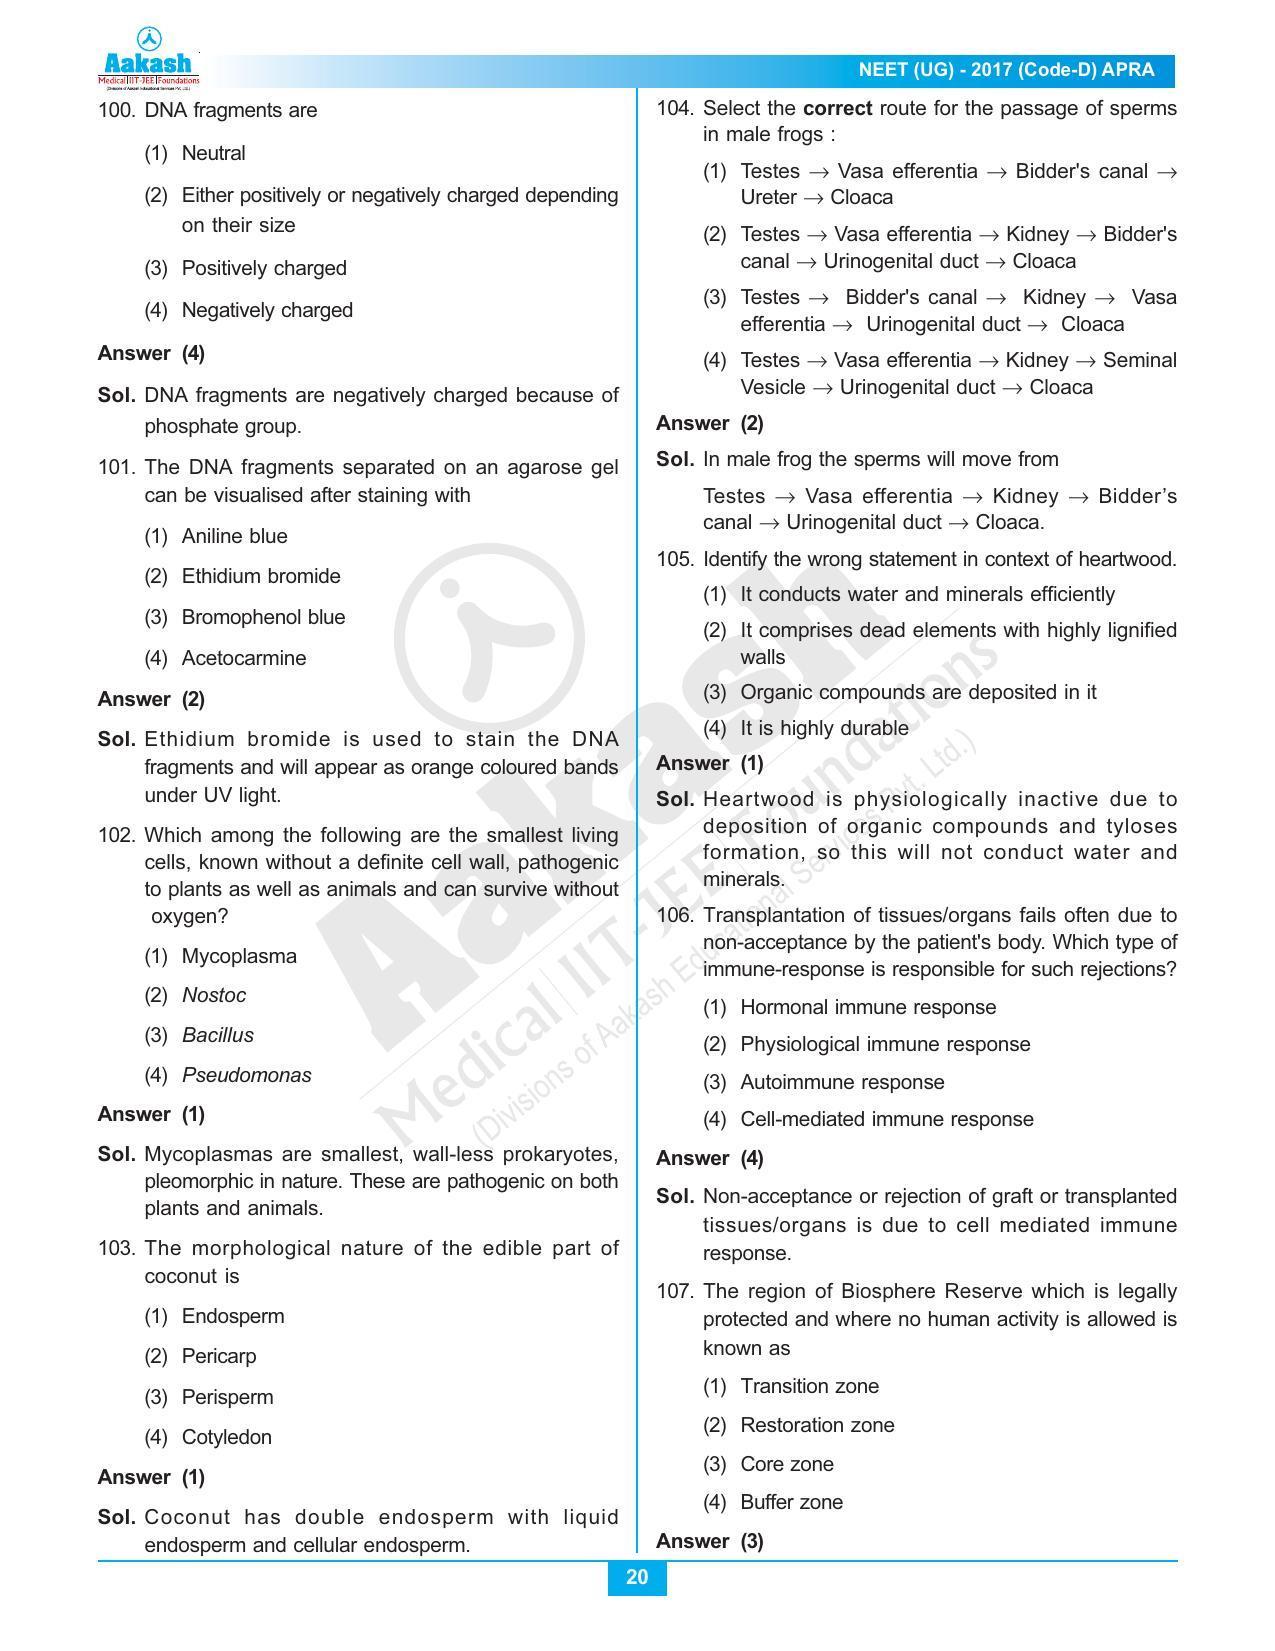  NEET Code D 2017 Answer & Solutions - Page 20